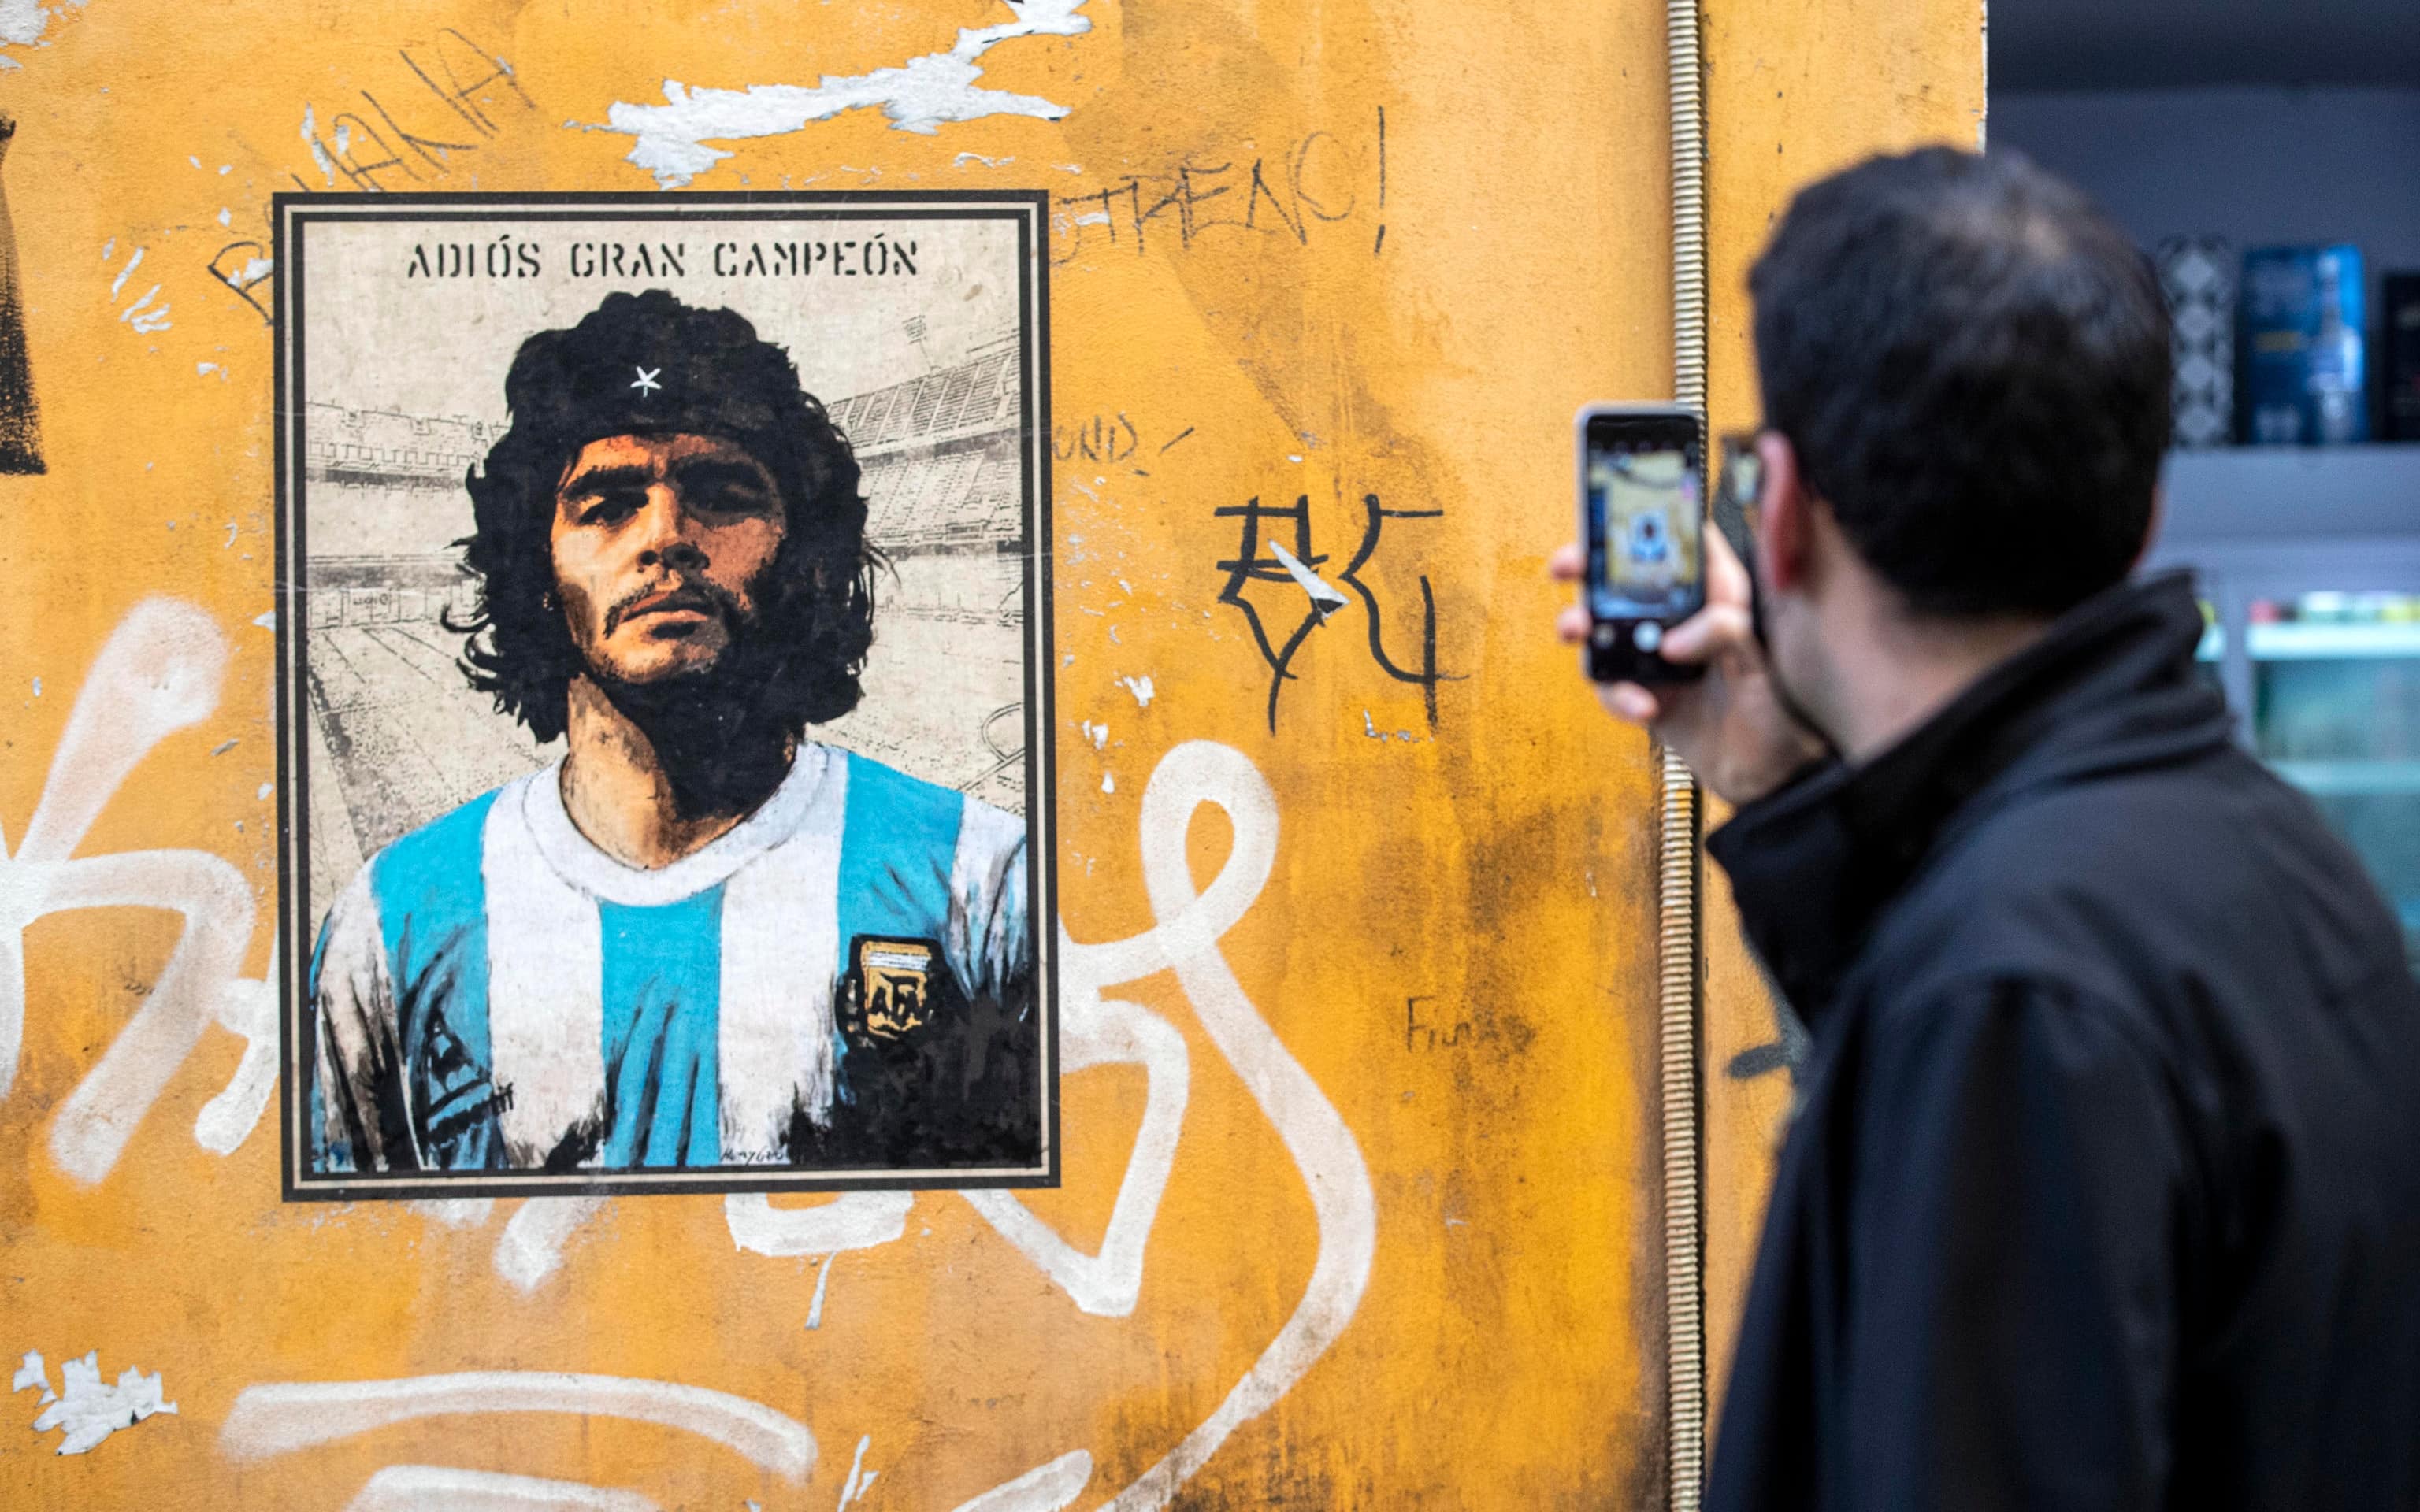 Mural dedicated to Diego Armando Maradona, in via del Politeama in the Trastevere district of Rome, 26 November 2020. The soccer legend died on 25 November at the age of 60 after a heart attack.
ANSA/MASSIMO PERCOSSI